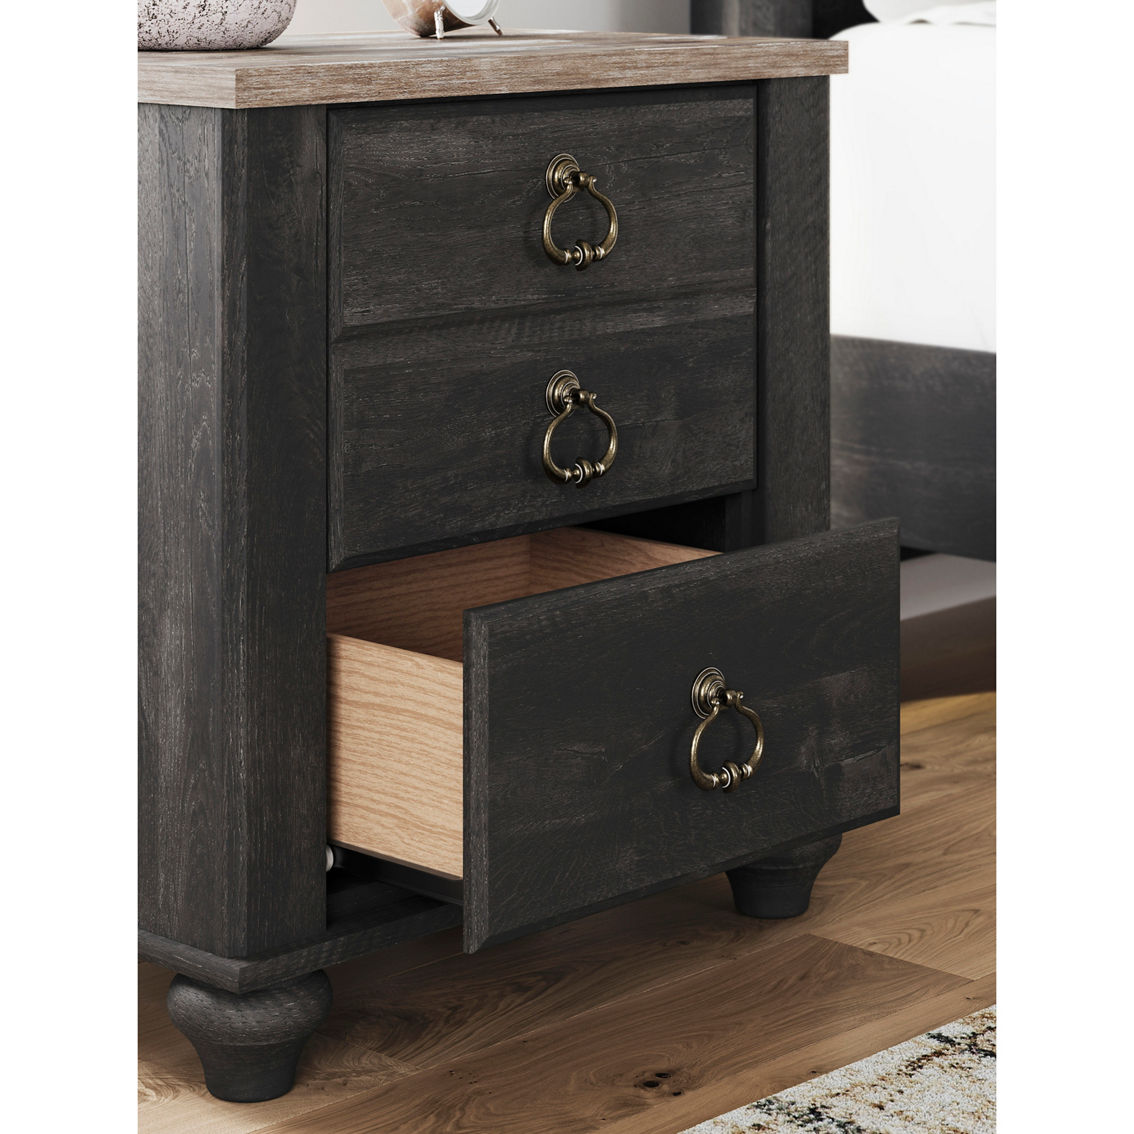 Signature Design by Ashley Nanforth Nightstand - Image 8 of 8